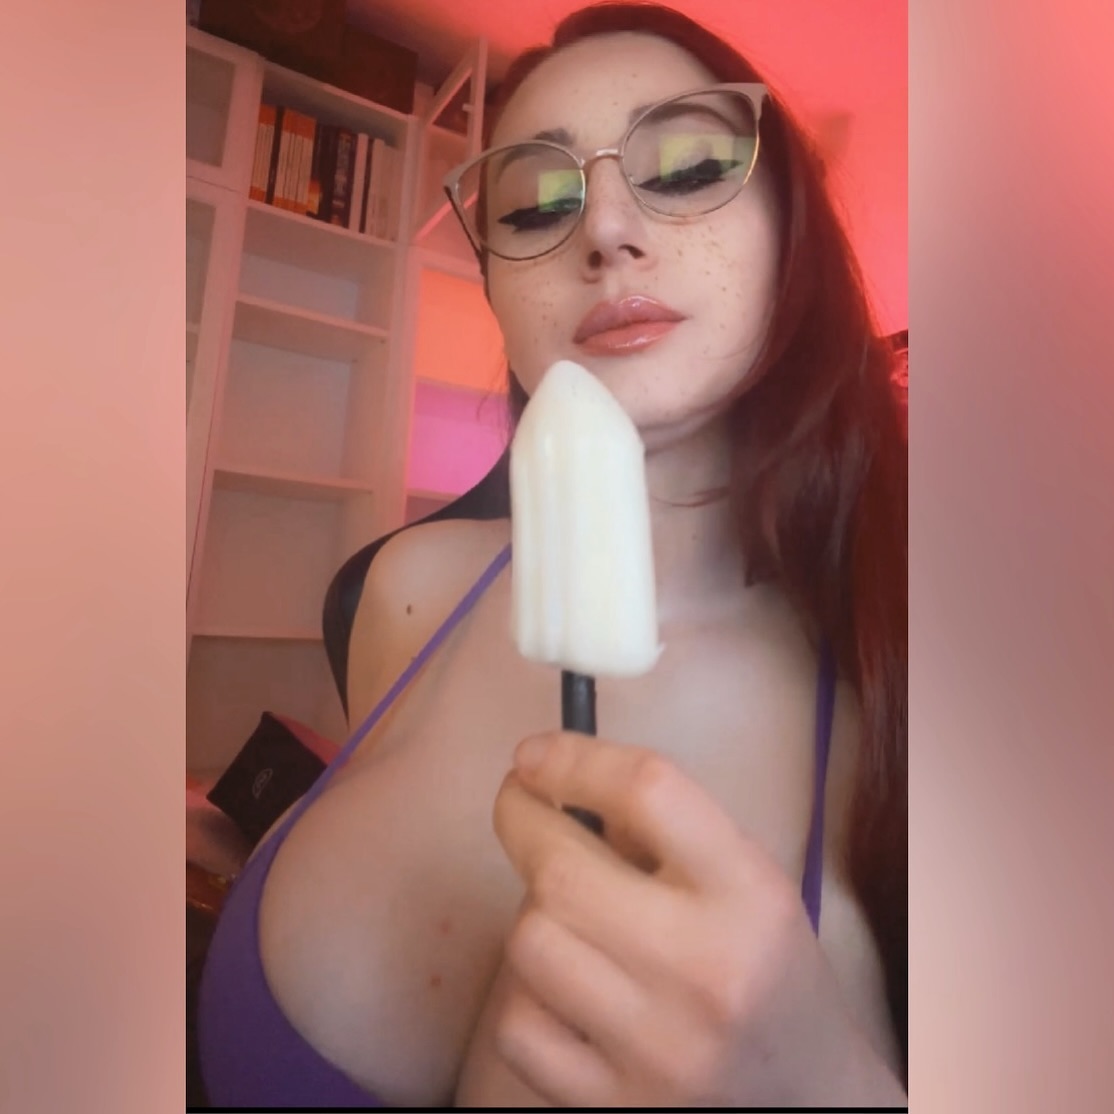 I was in a popsicle mood ^^

(If you want to see a video of me innocently eating said popsicle, you know where to find it)